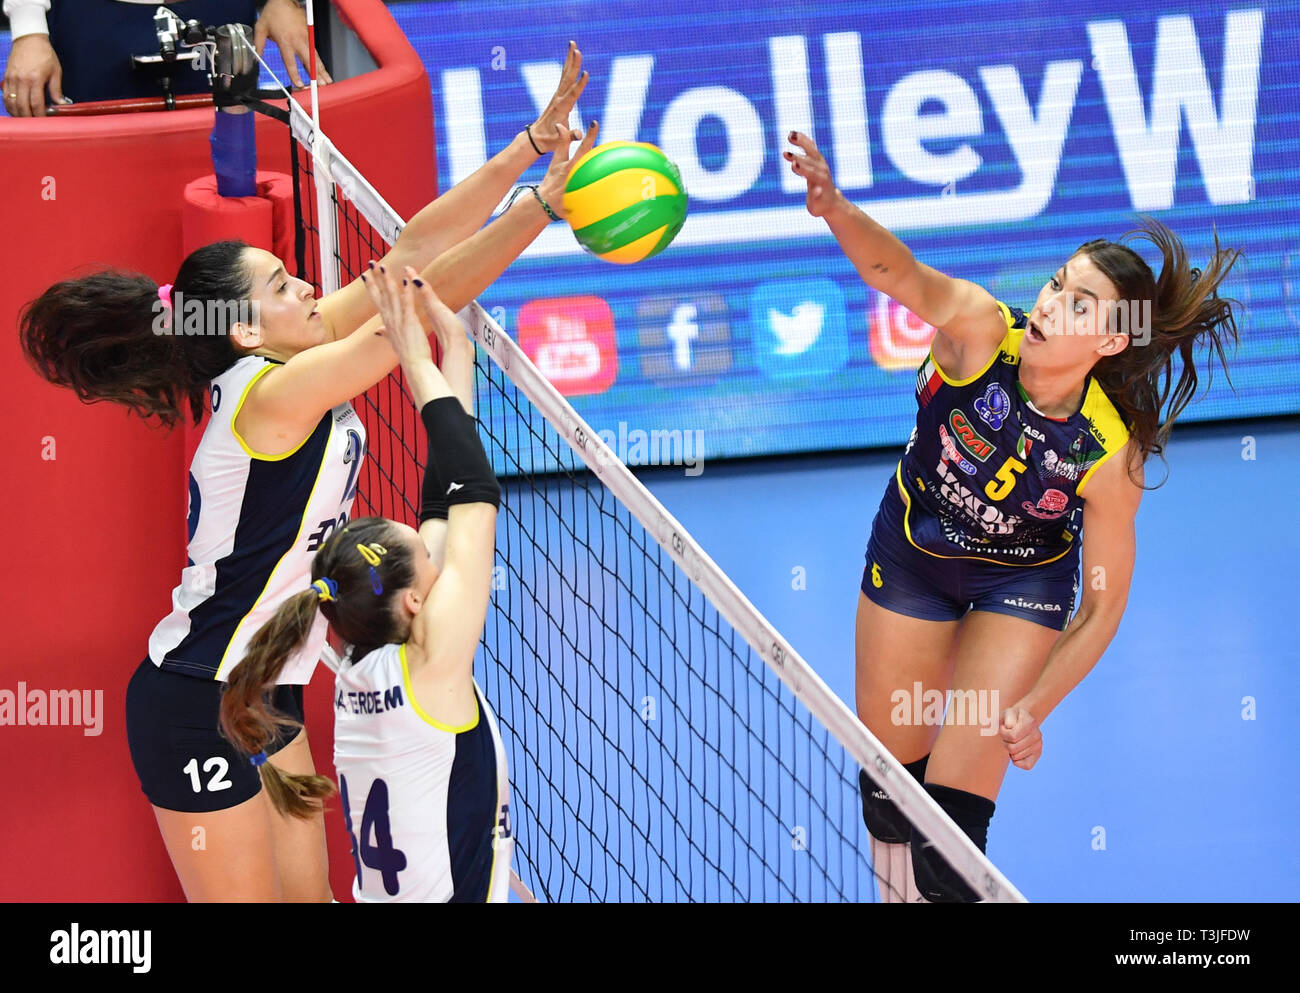 Istanbul, Turkey. 9th Apr, 2019. Robin De Kruijf (R) of Conegliano hits the ball during the second round match of the 2019 CEV Volleyball Champions League semifinals between Imoco Volley Conegliano of Italy and Fenerbahce Opet Istanbul of Turkey in Istanbul, Turkey, April 9, 2019. Conegliano won 3-0 and advanced to the finals. Credit: Xu Suhui/Xinhua/Alamy Live News Stock Photo